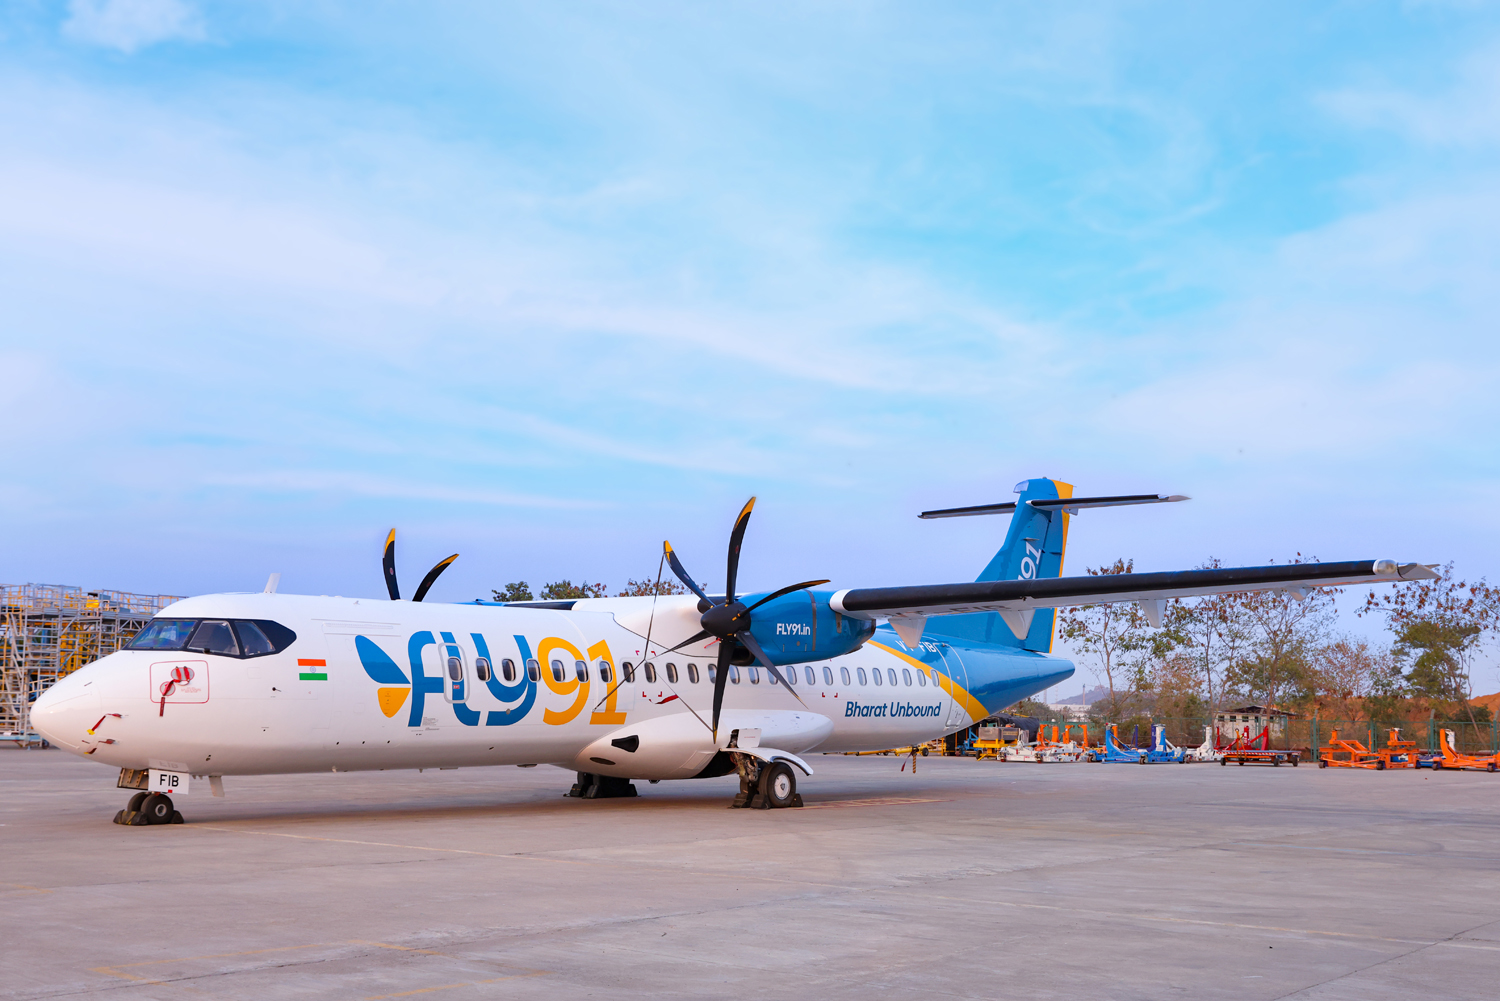 India’s regional airline carrier FLY91 partners with IBS Software to democratise air travel across India